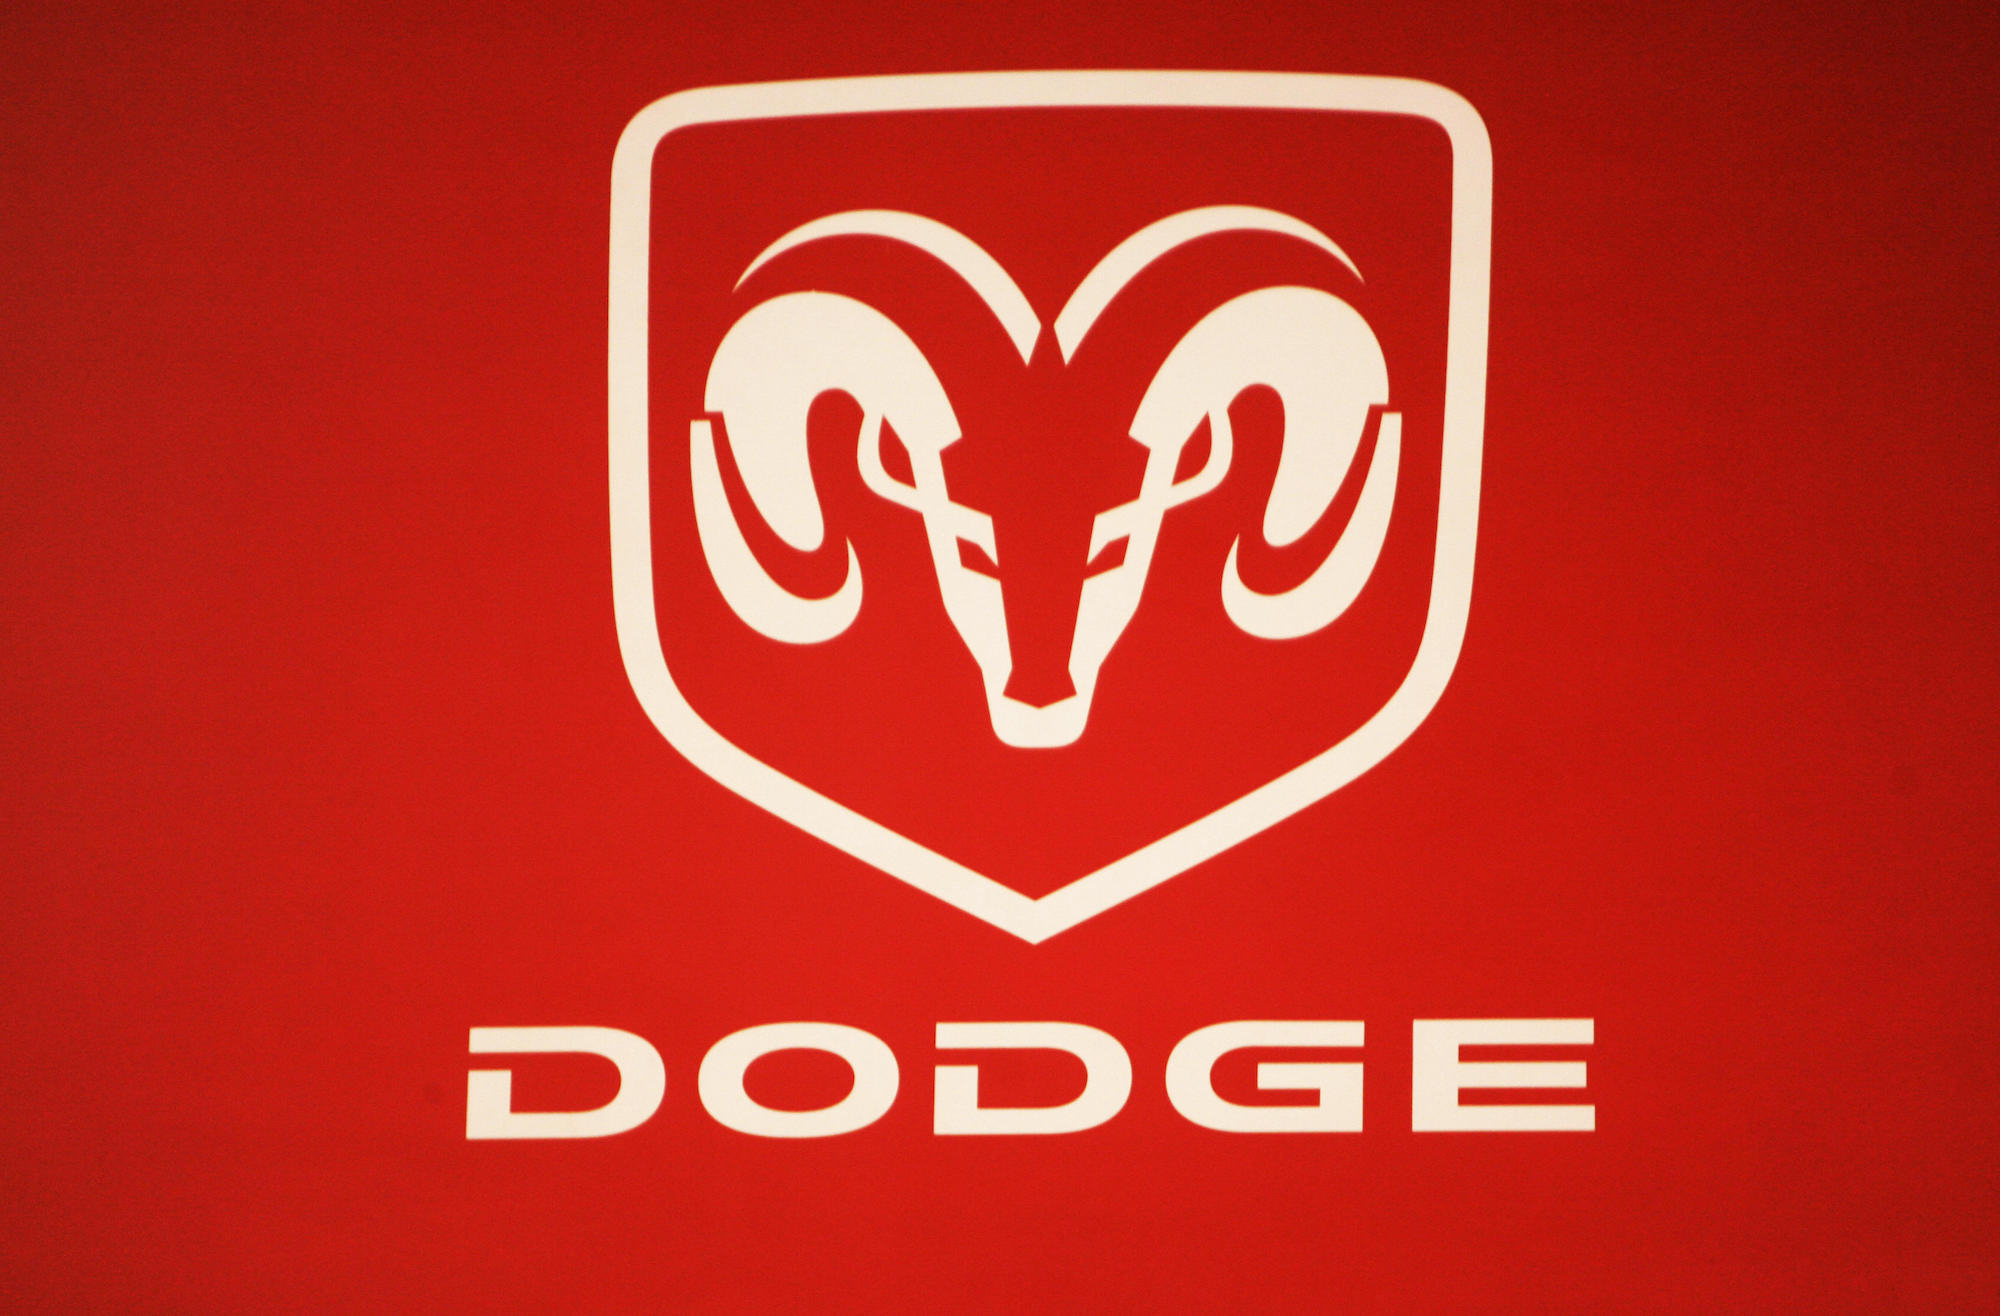 The logo for Dodge Ram can be seen on display at the South Florida International Auto Show in Miami Beach, Florida, in October 2006.